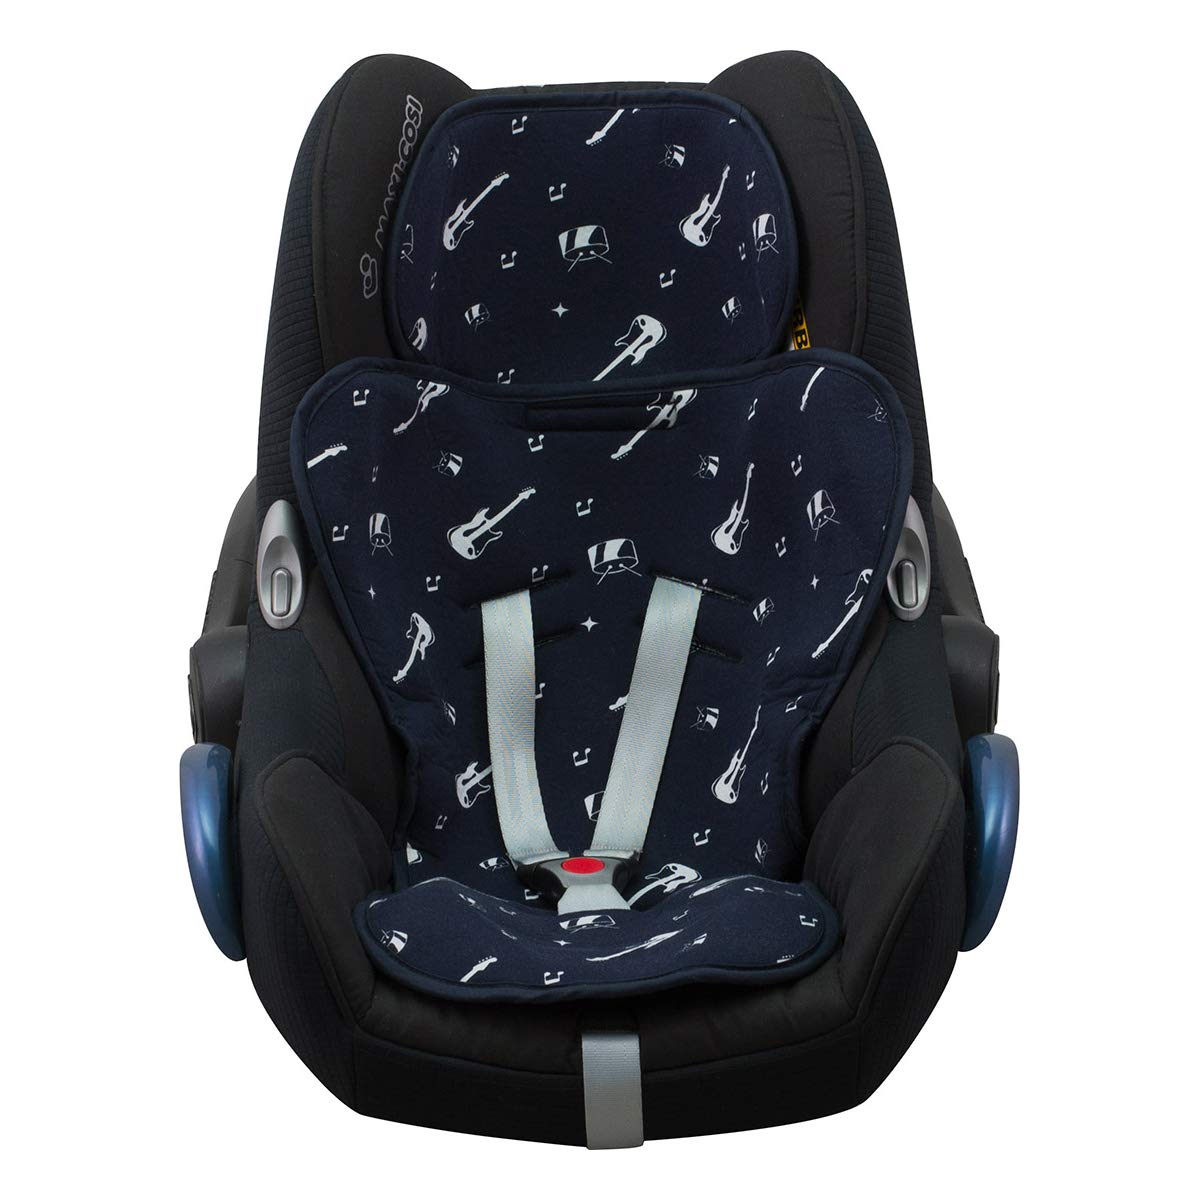 Universal Car Seat Cover for Child Car Seat Group 0.1, 2, 3 Janabebe